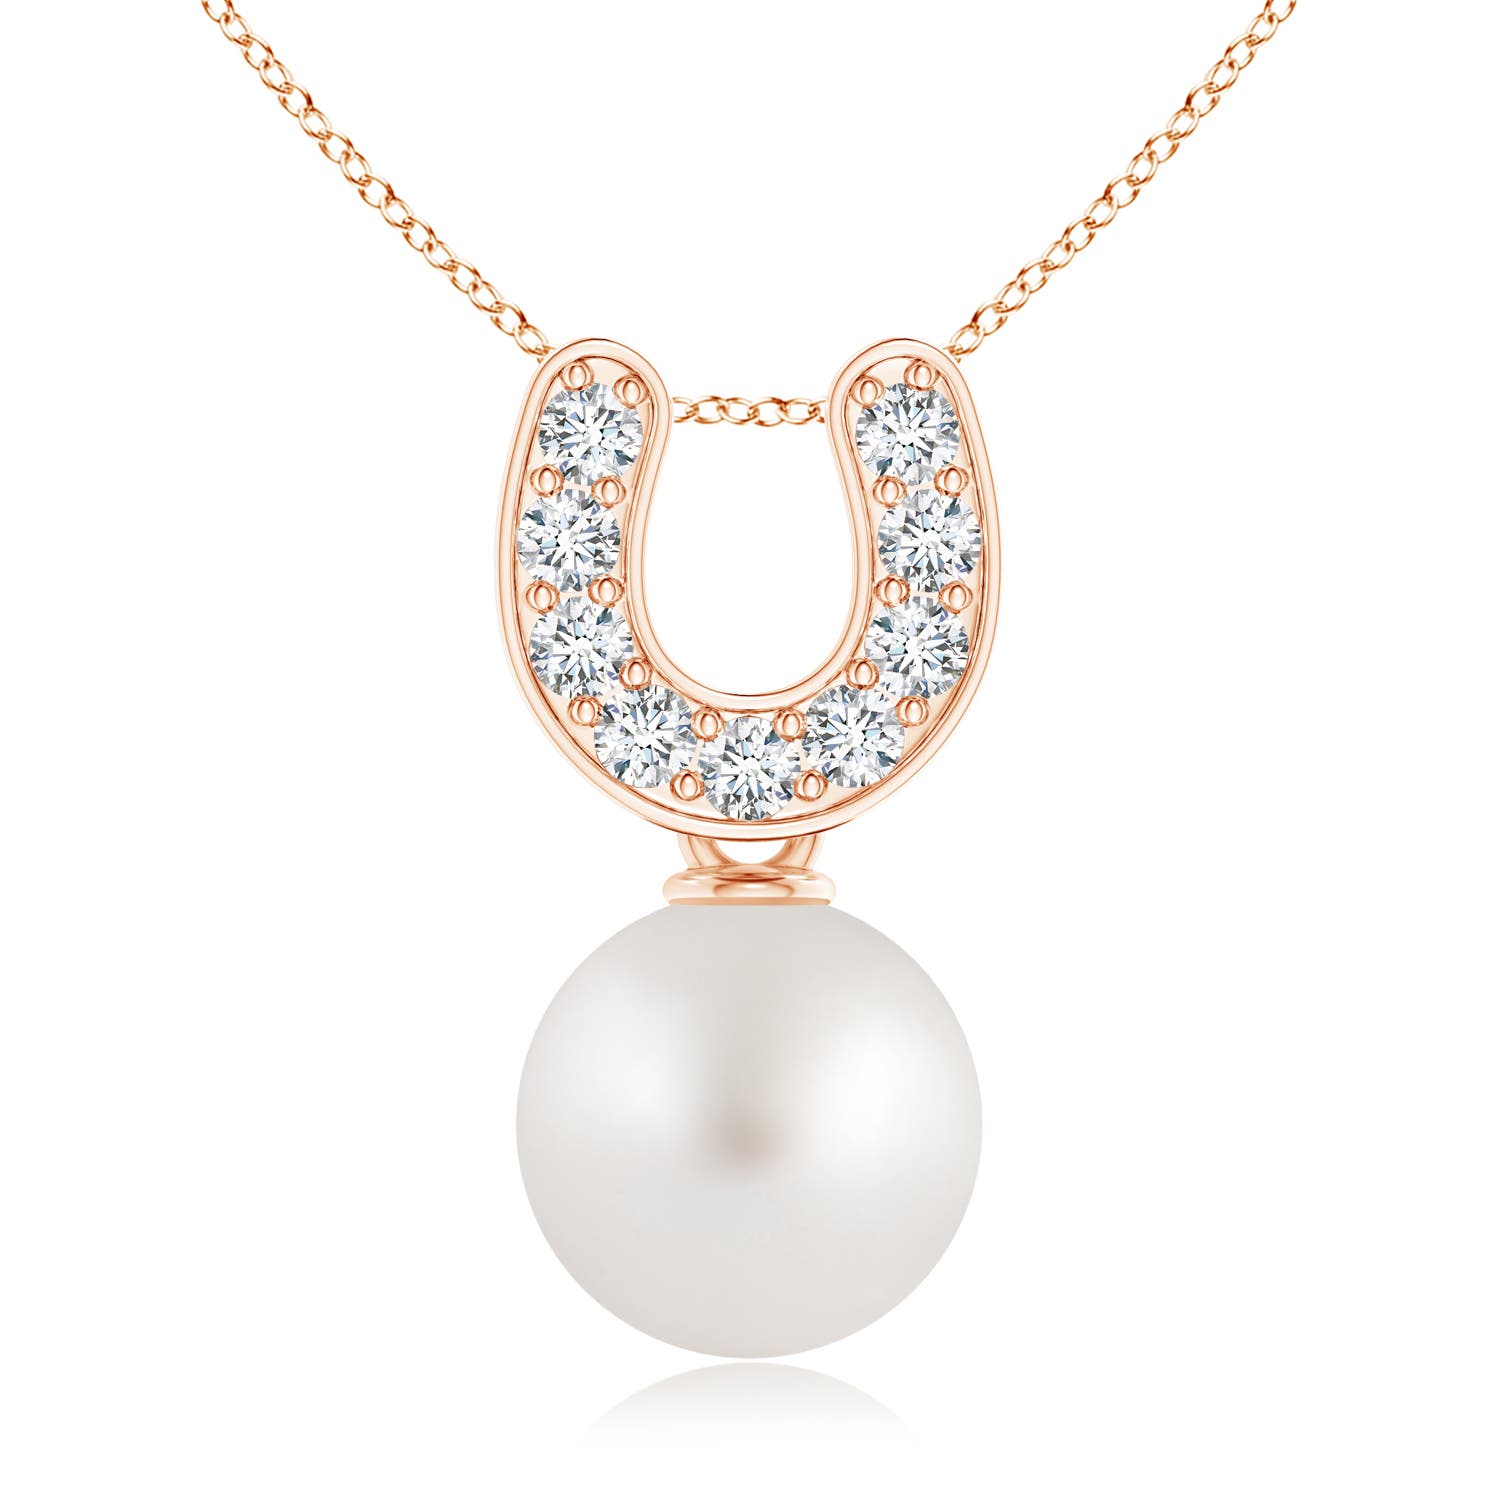 AA - South Sea Cultured Pearl / 3.89 CT / 14 KT Rose Gold